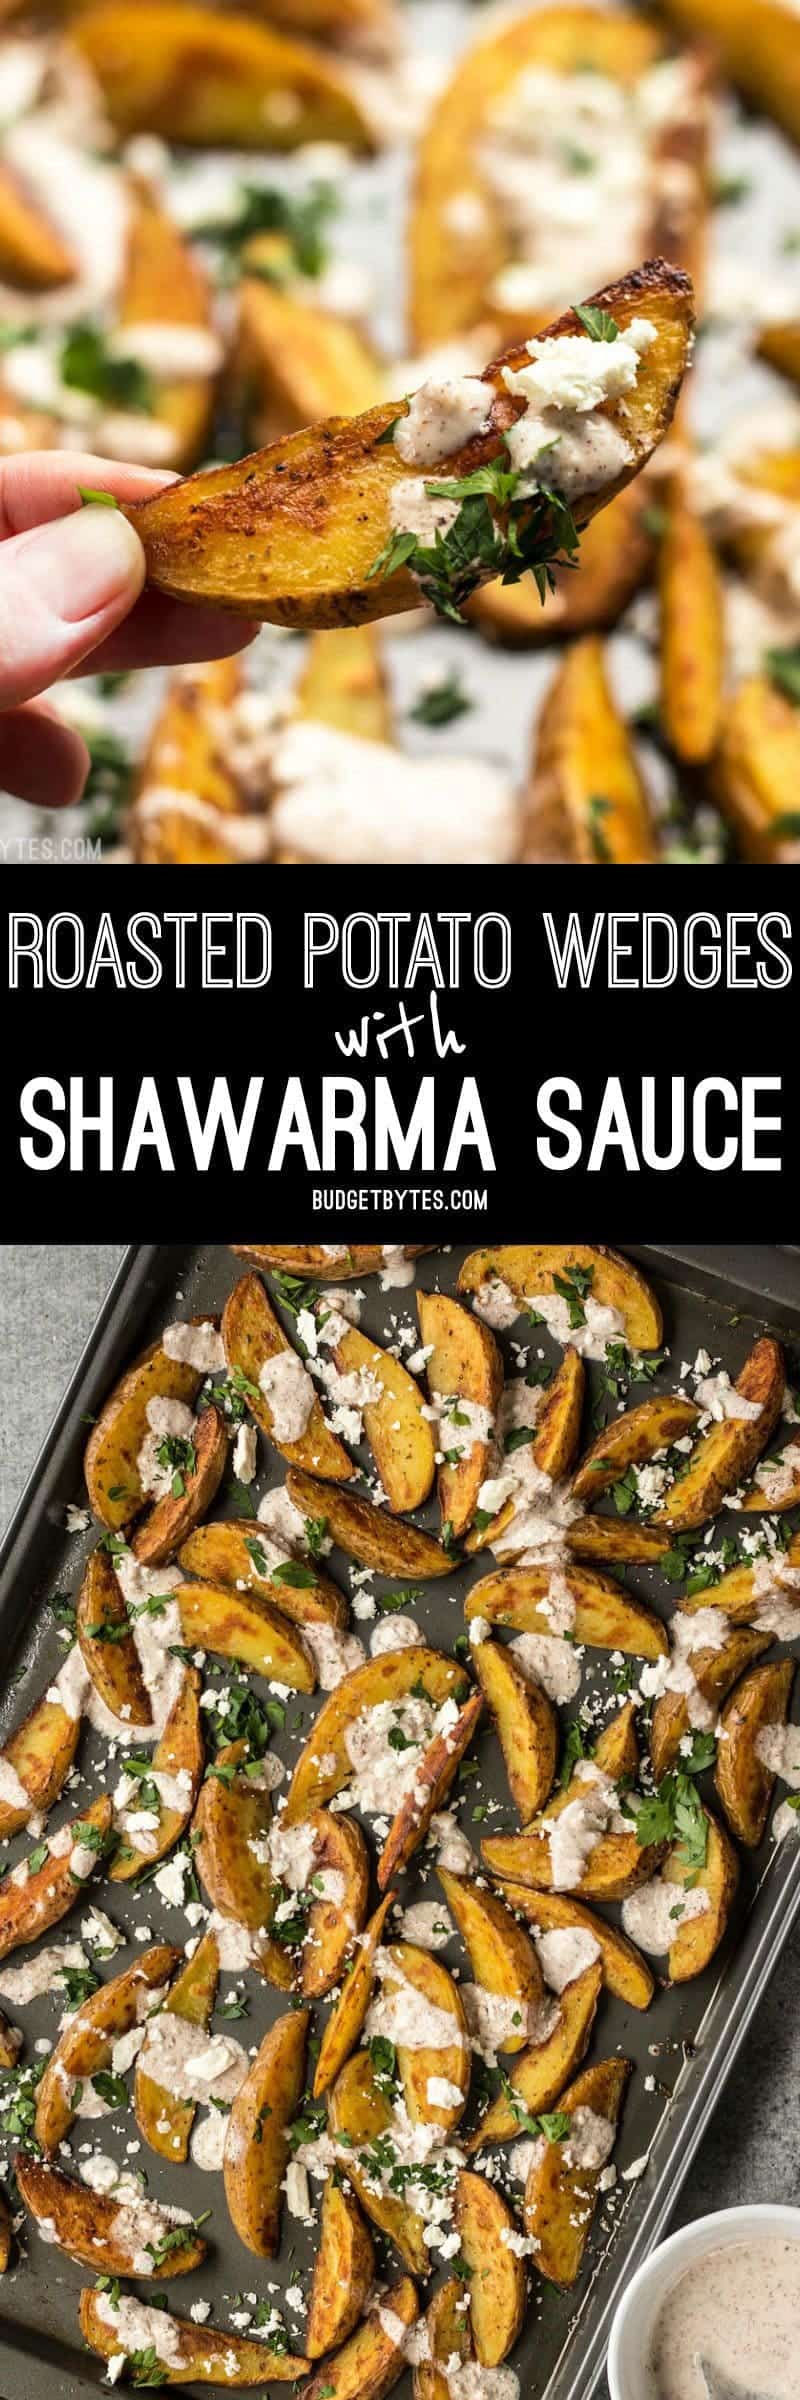 These simple Roasted Potato Wedges are the perfect vehicle for this creamy, garlicky shawarma sauce and crumbled feta. BudgetBytes.com